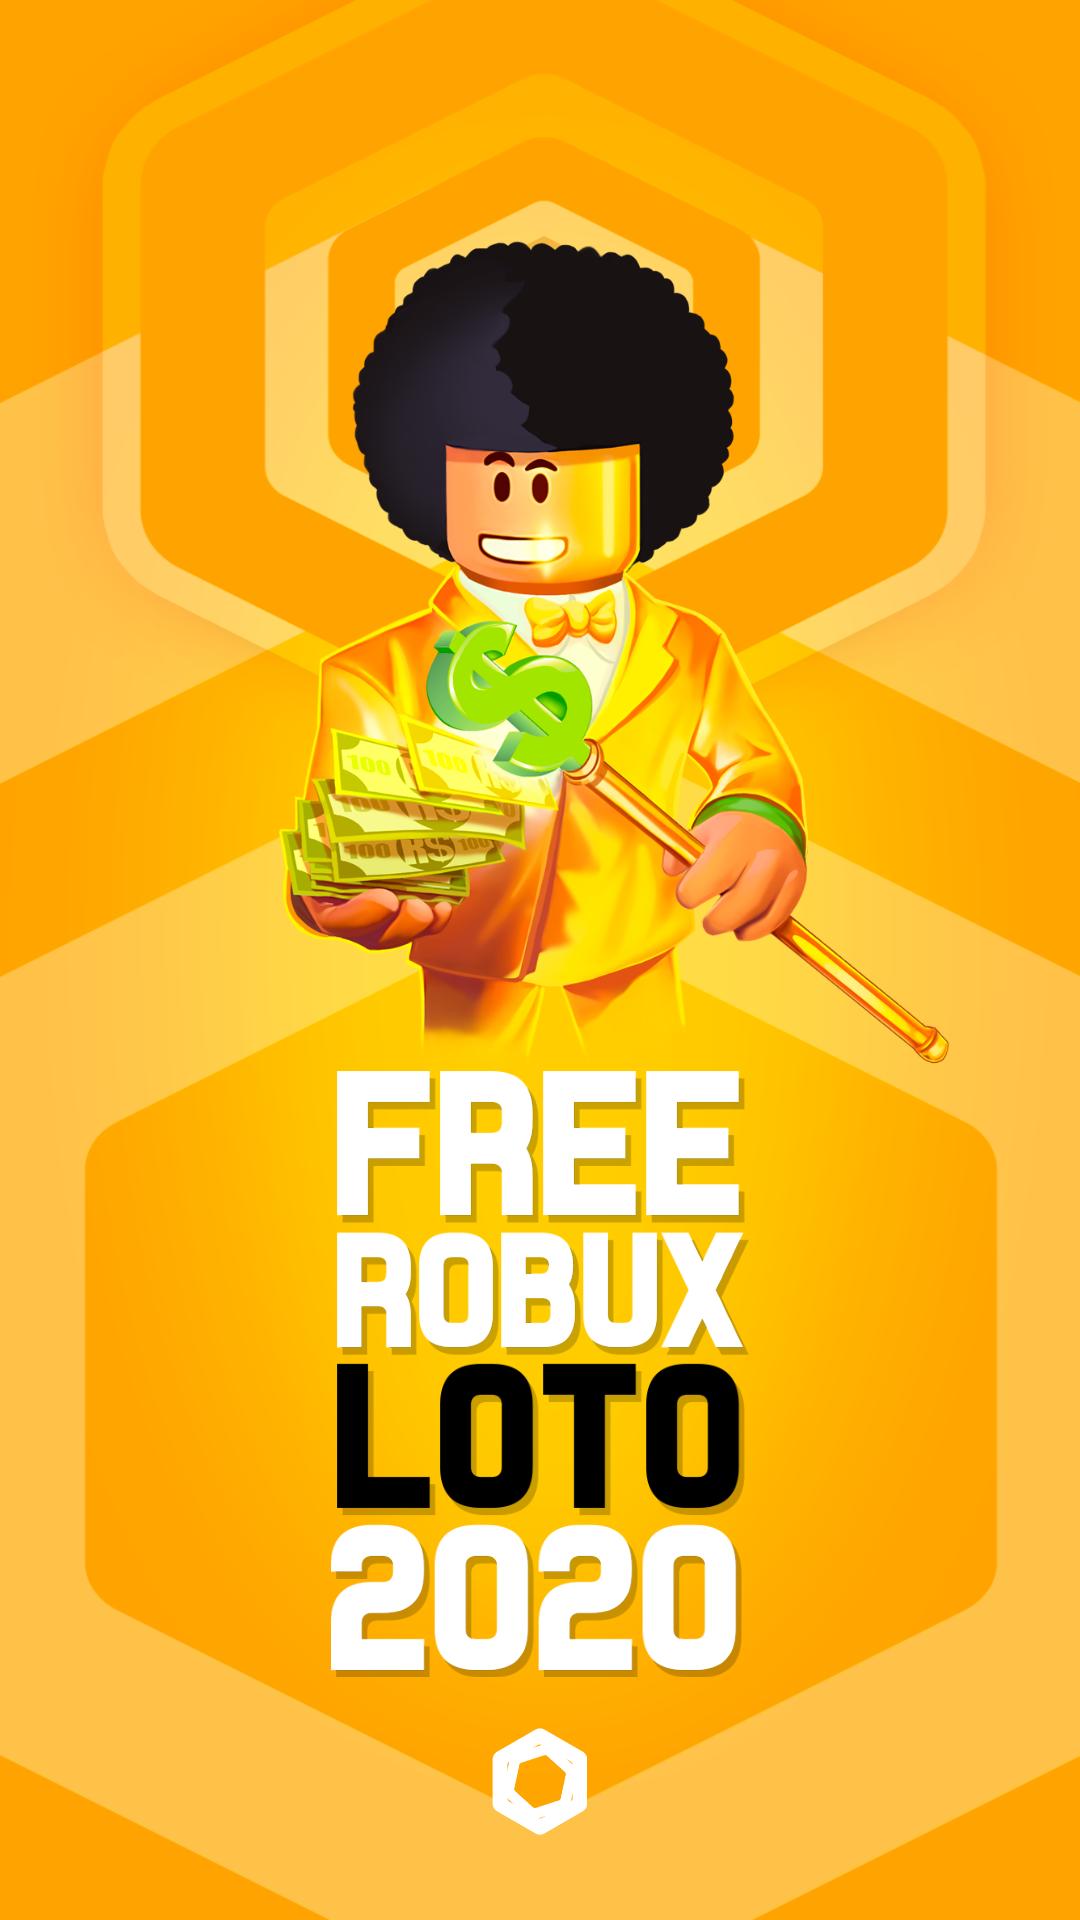 Free Robux Loto 2020 For Android Apk Download - how to get free robux on a zte phone